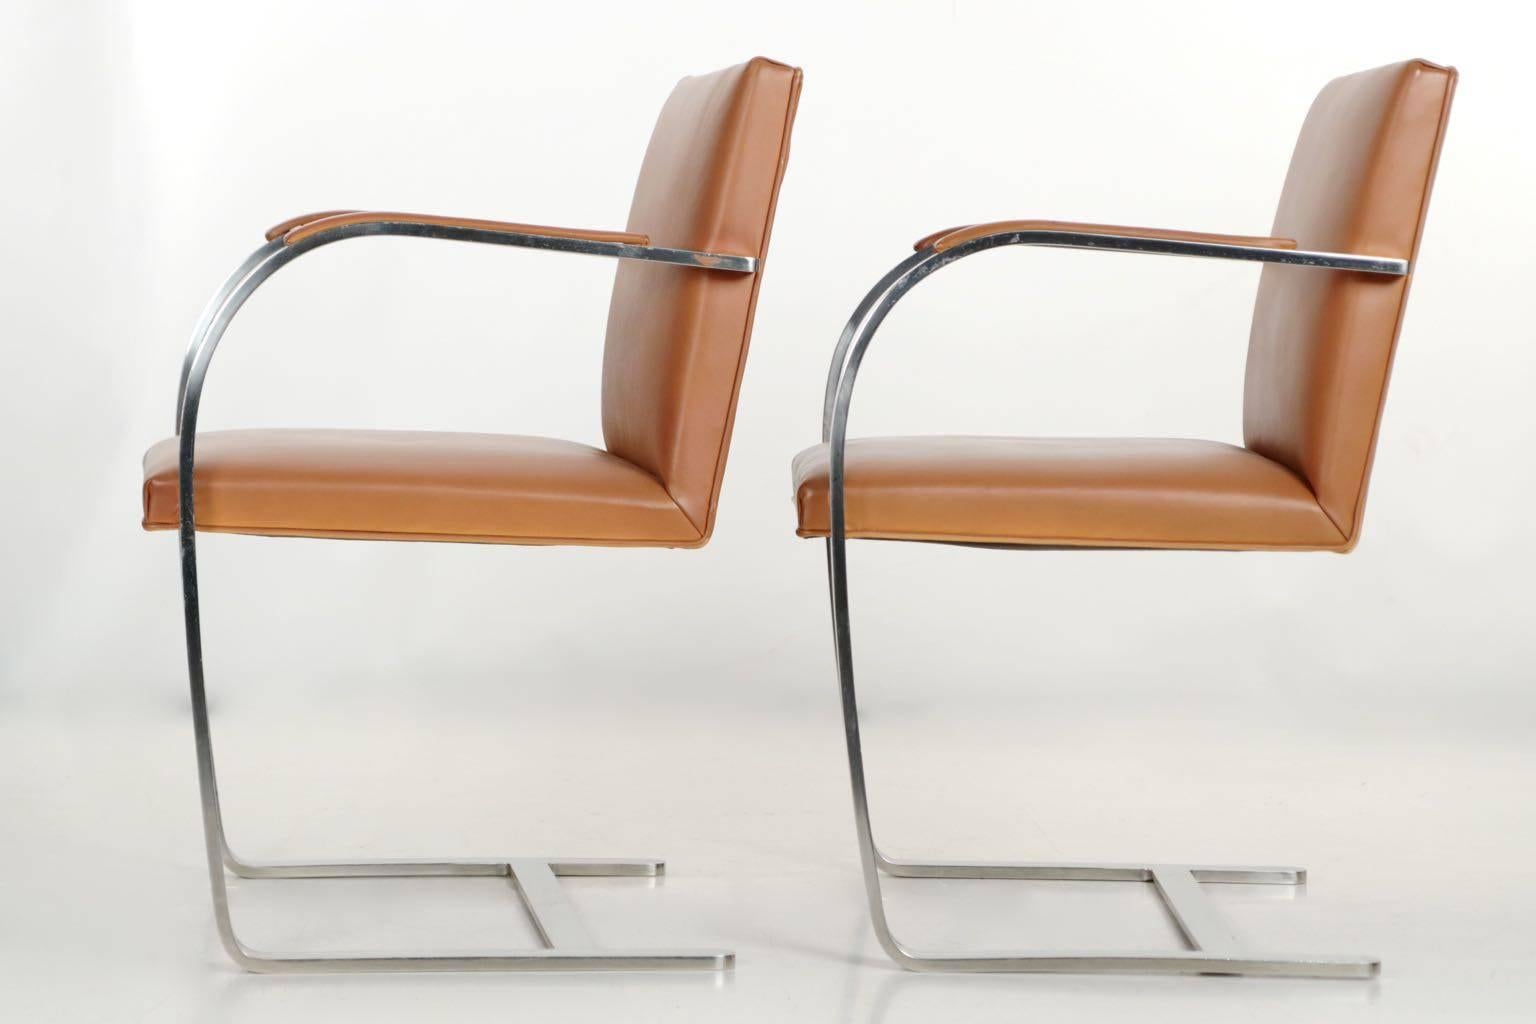 American Pair of Steel and Leather BRNO Arm Chairs by Mies Van Der Rohe for Knoll